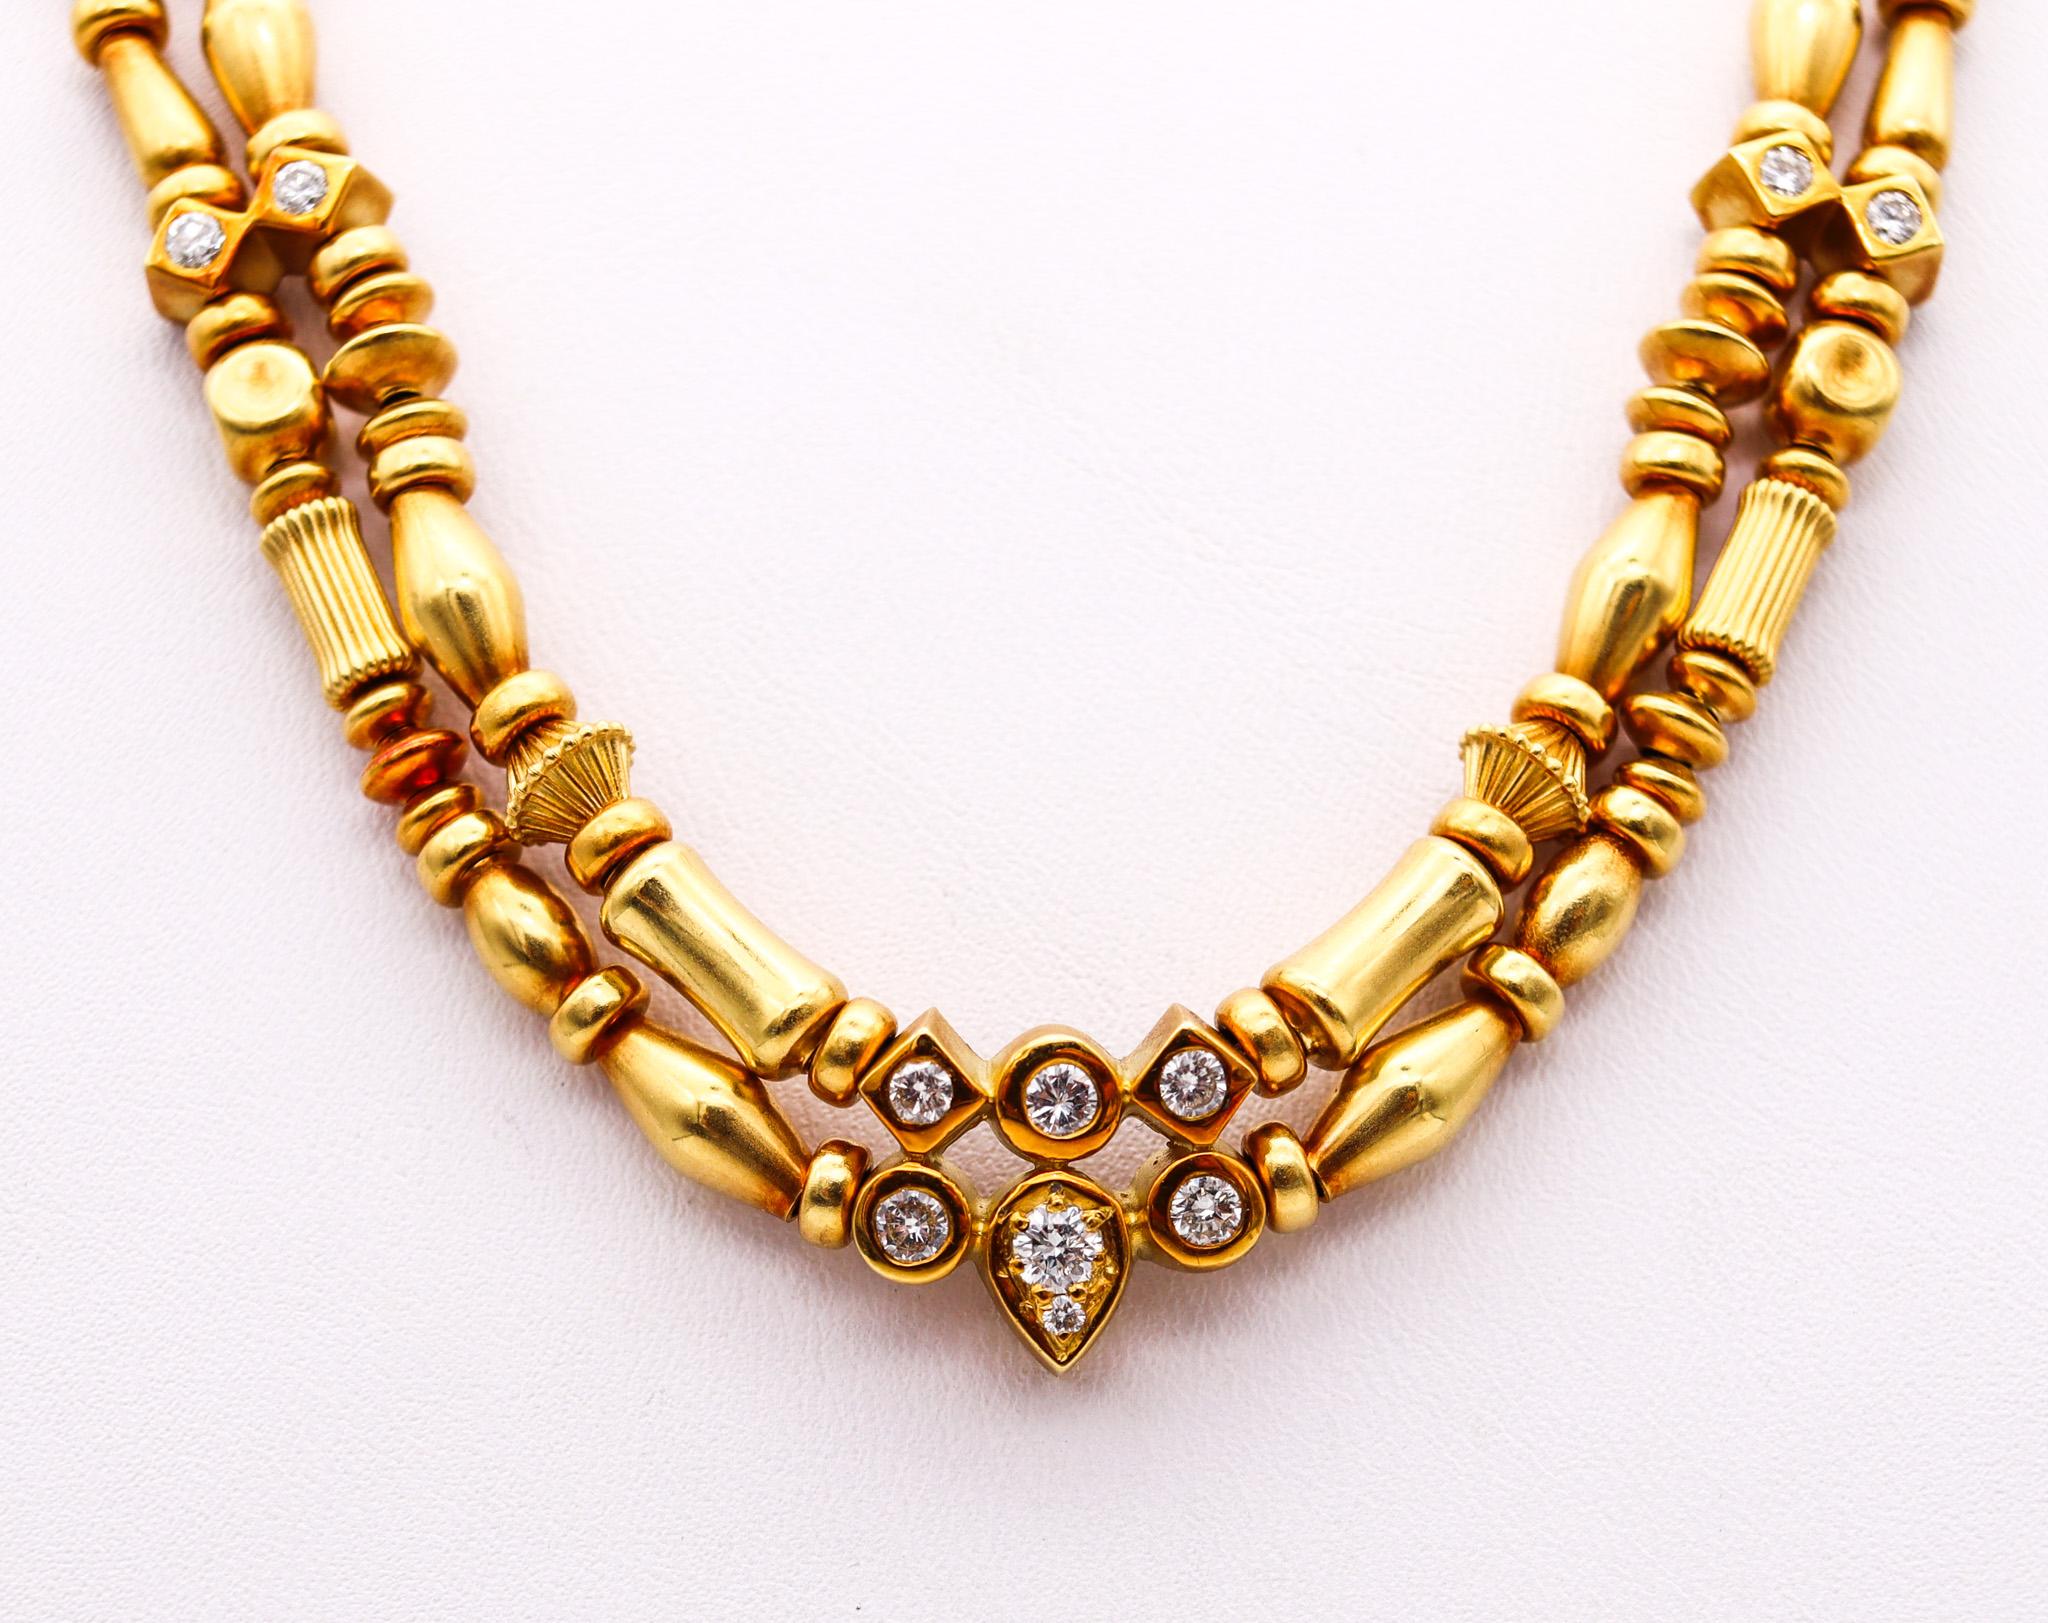 Etruscan necklace designed by Seidengang.

A beautiful statement necklace, created by the iconic jewelry designer's SeidenGang. This double necklace is part of the popular Etruscan revival collection, carefully crafted in solid rich yellow gold of